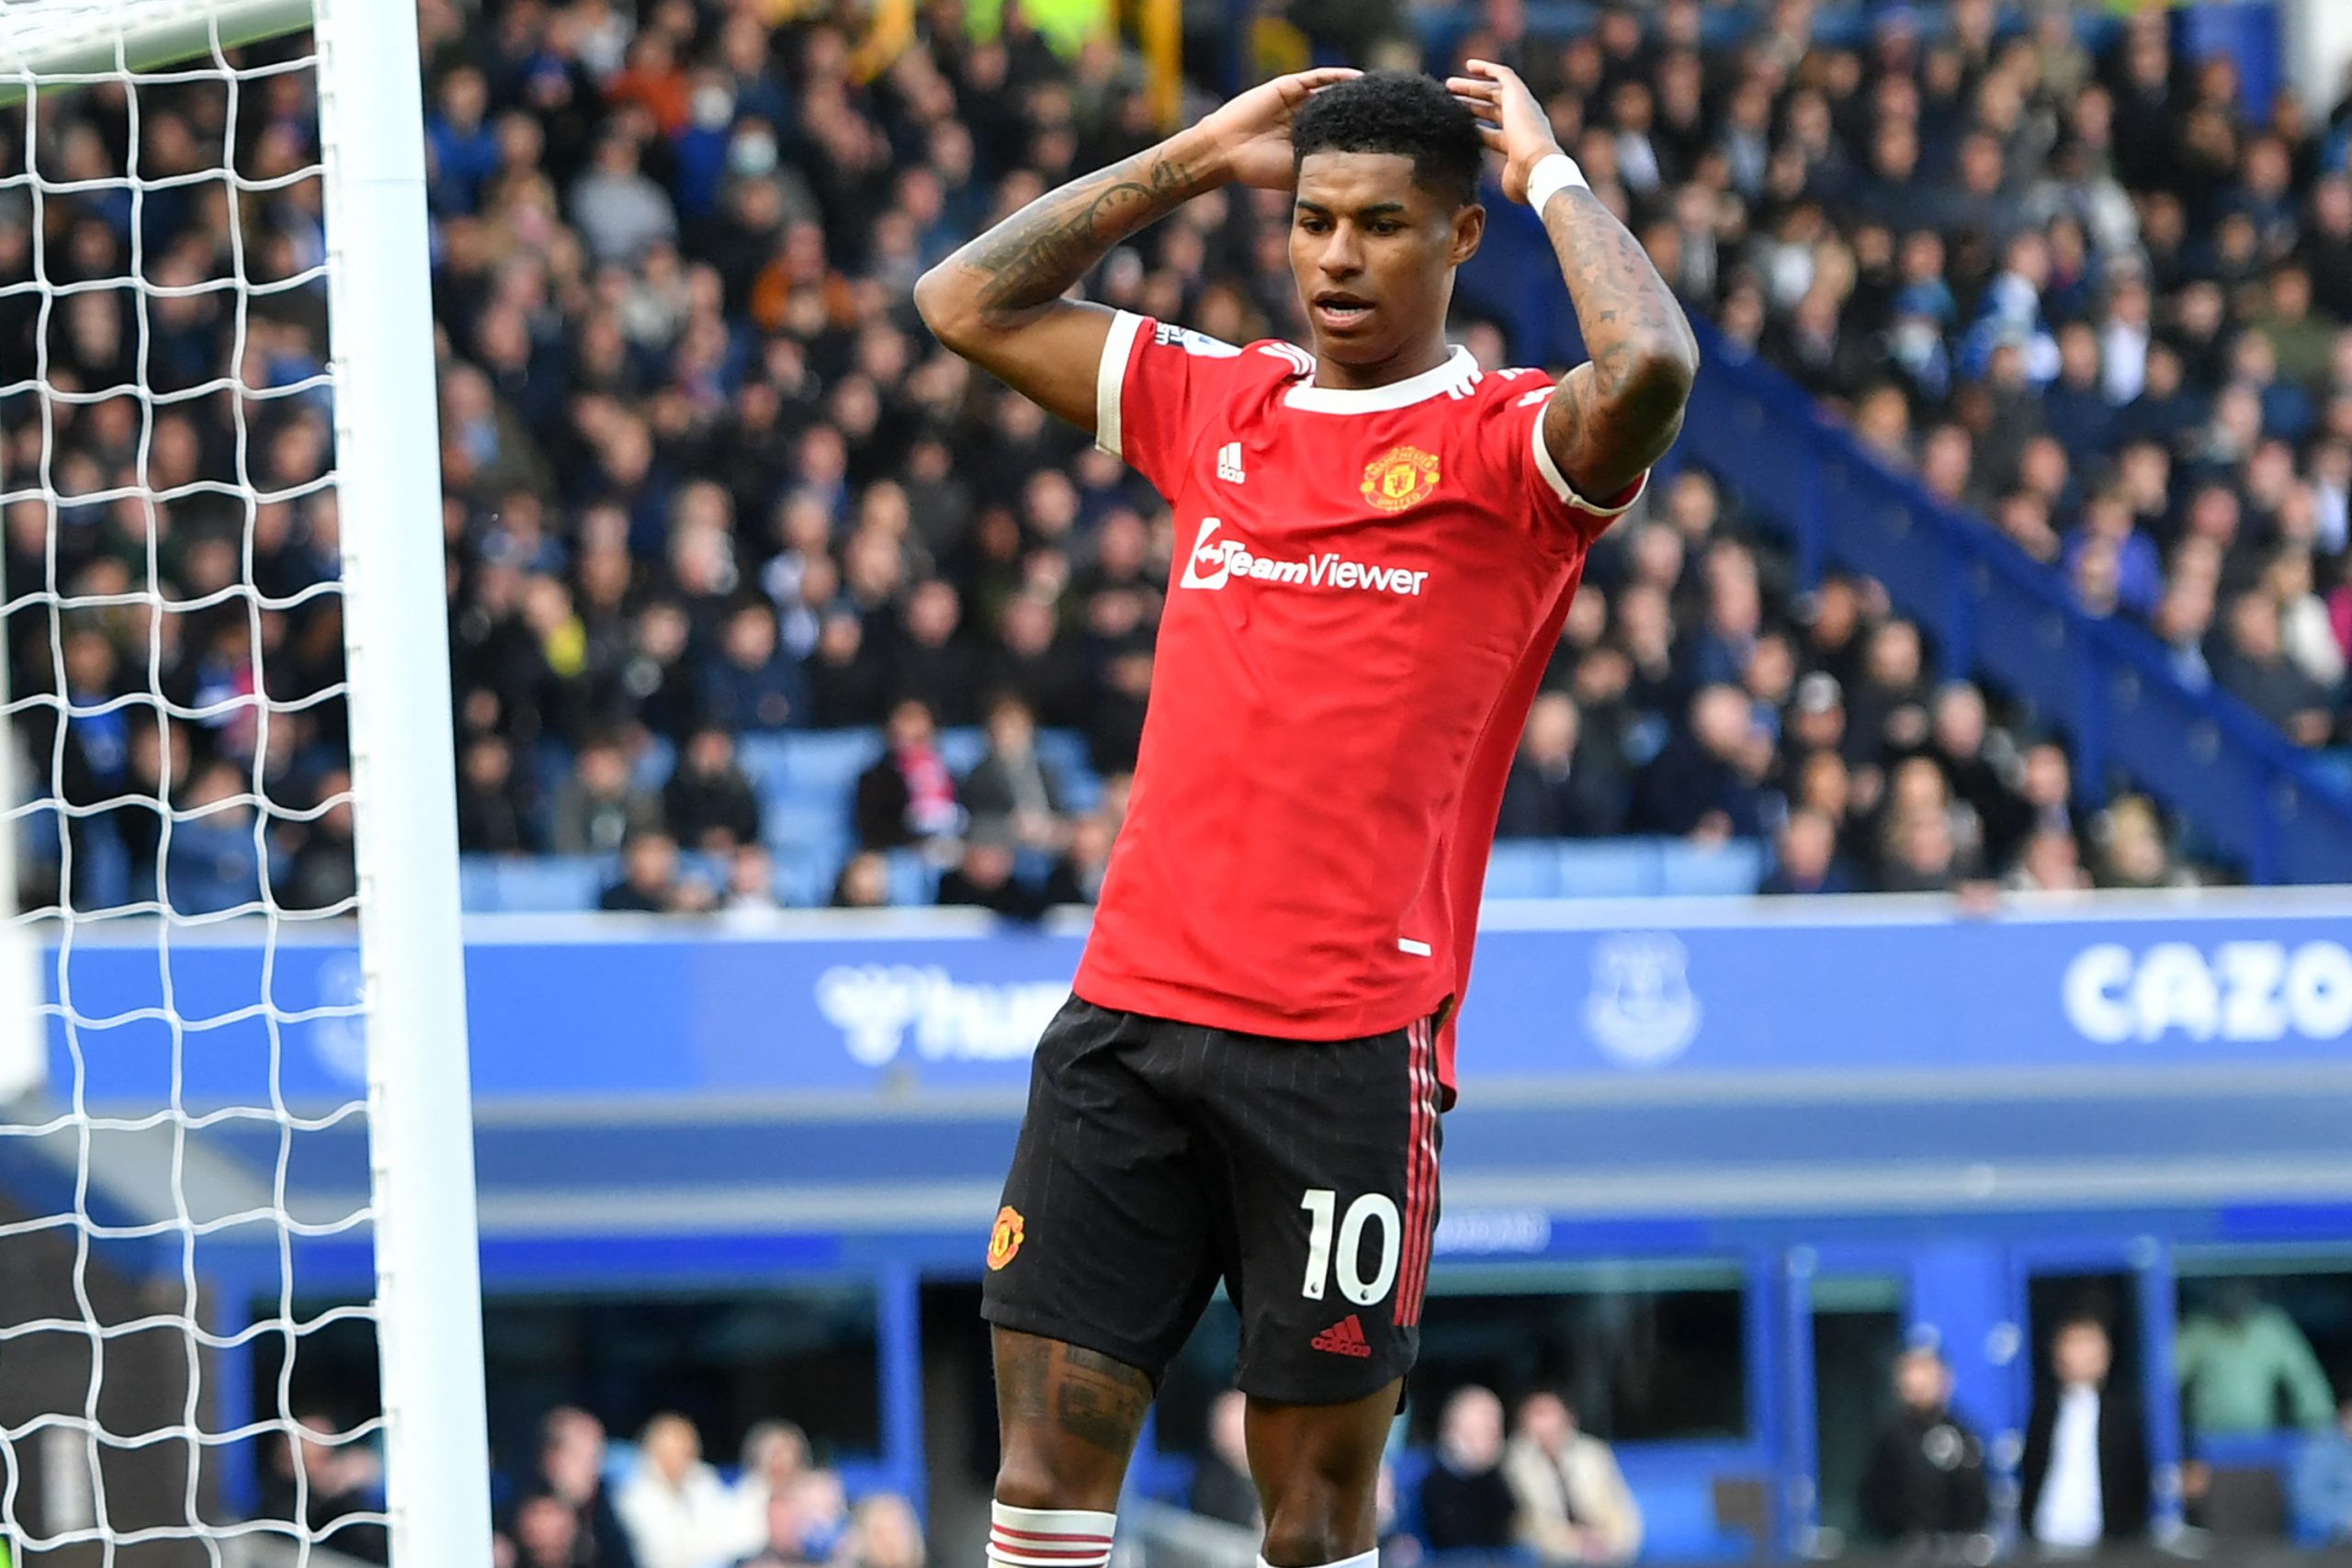 Marcus Rashford could leaves Manchester United in the near future.